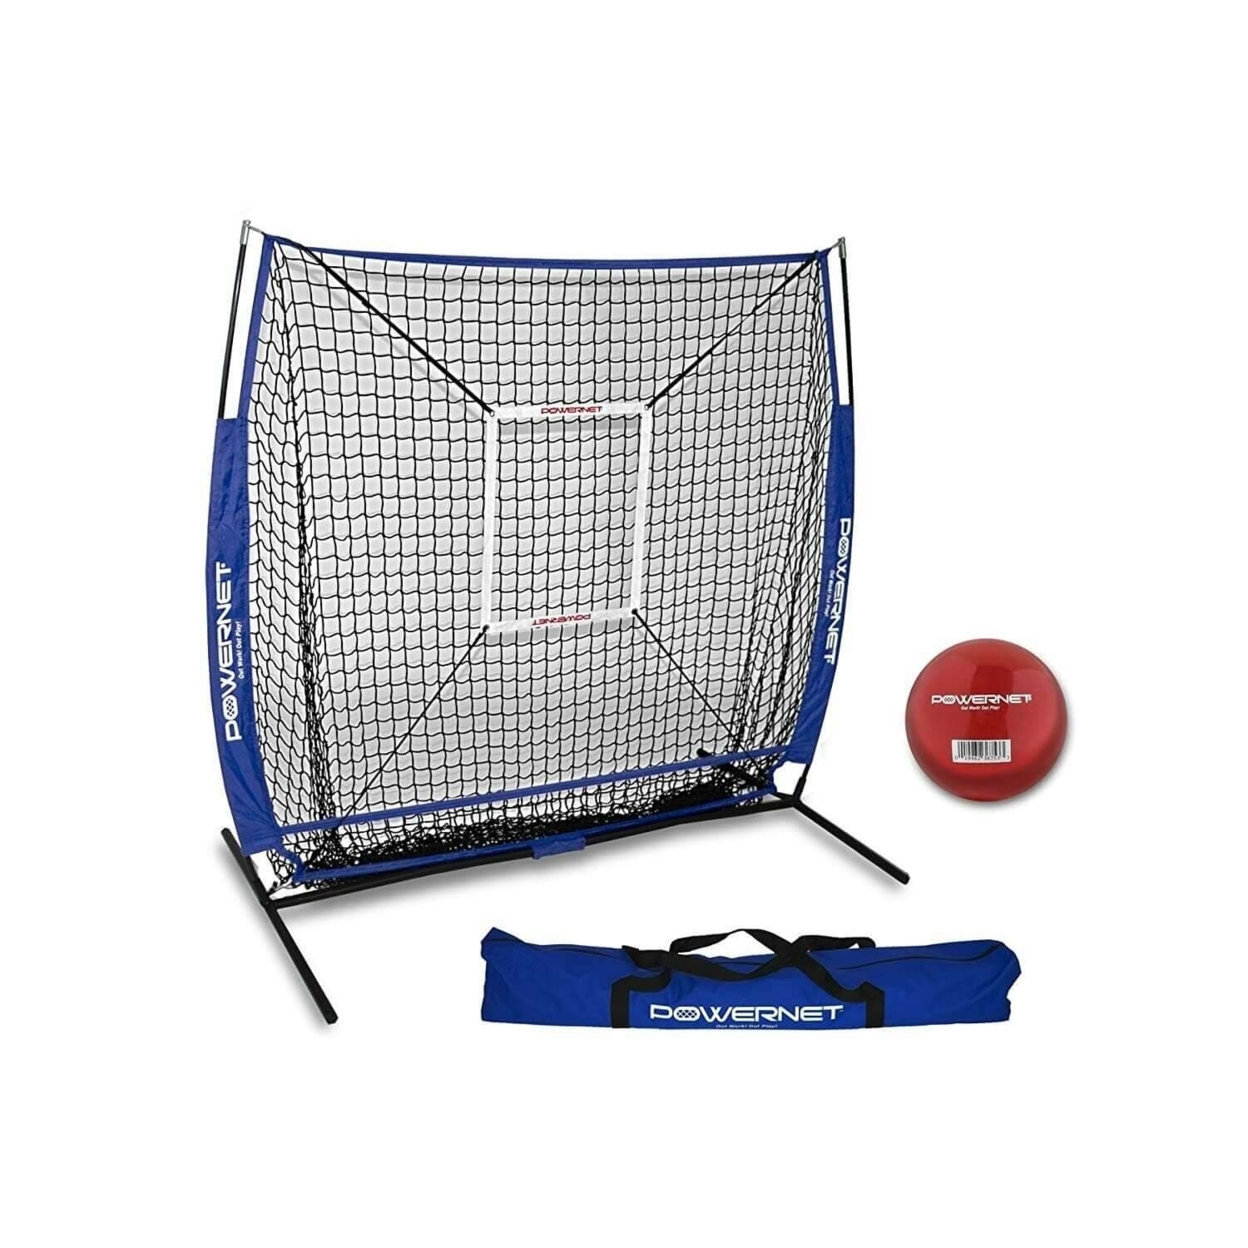 PowerNet 5x5 Practice Hitting Pitching Net + Strike Zone Attachment + Weighted Training Ball Bundle + Carry Bag - Royal Blue